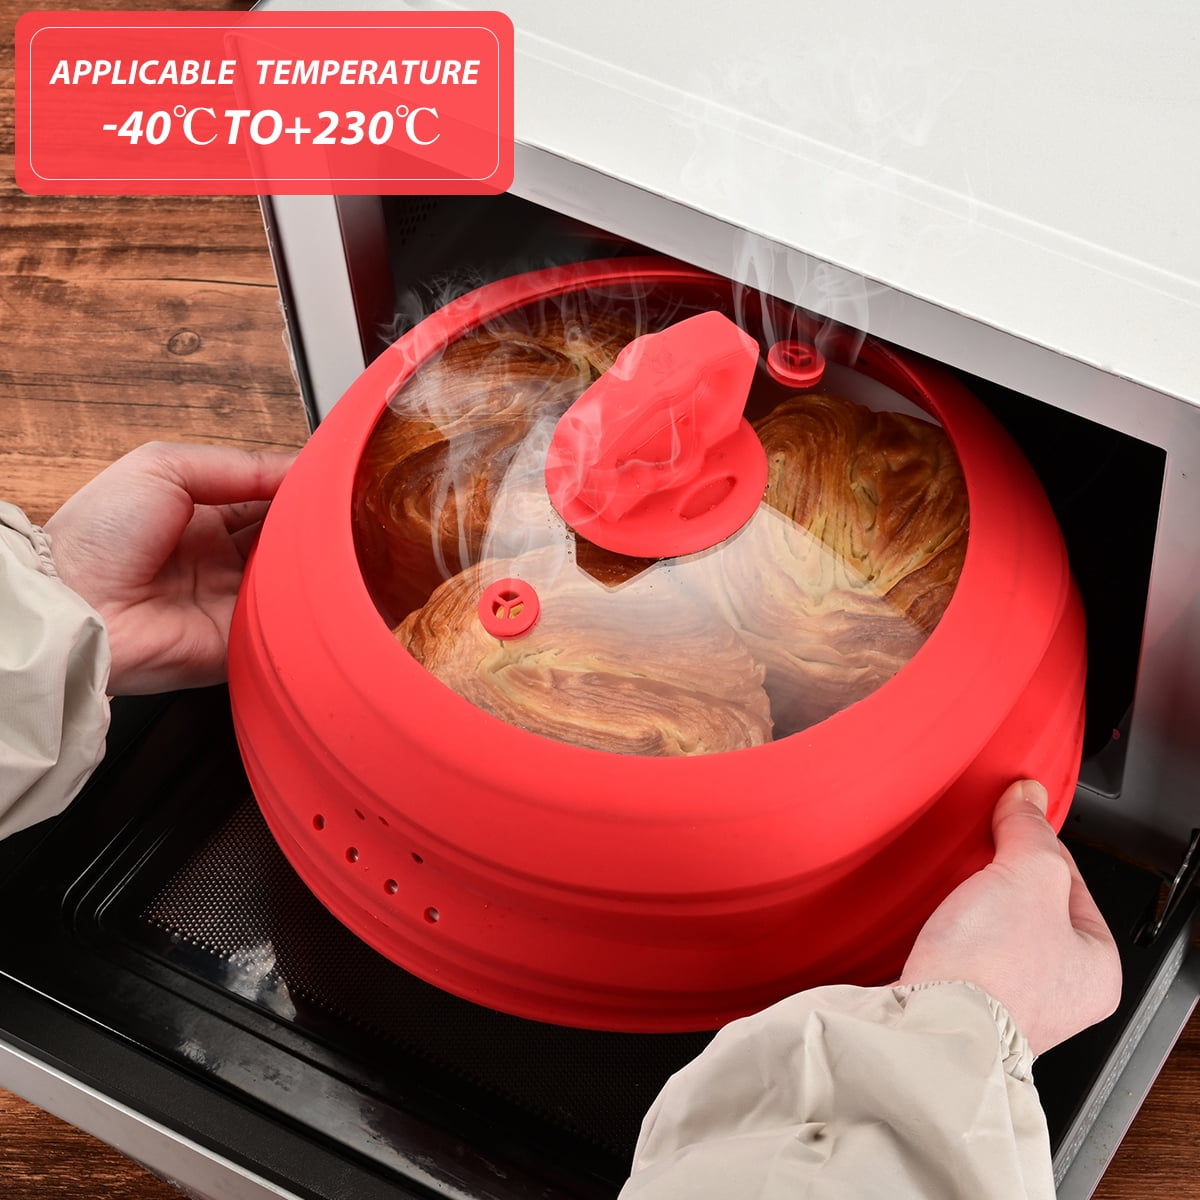 GLOU-GLOU GOOSE GGG Microwave Splatter Silicone Cover Collapsible Steamer,  Vented Multifunction Splash Lid with Glass Dish Bowl Plate for Food Cook